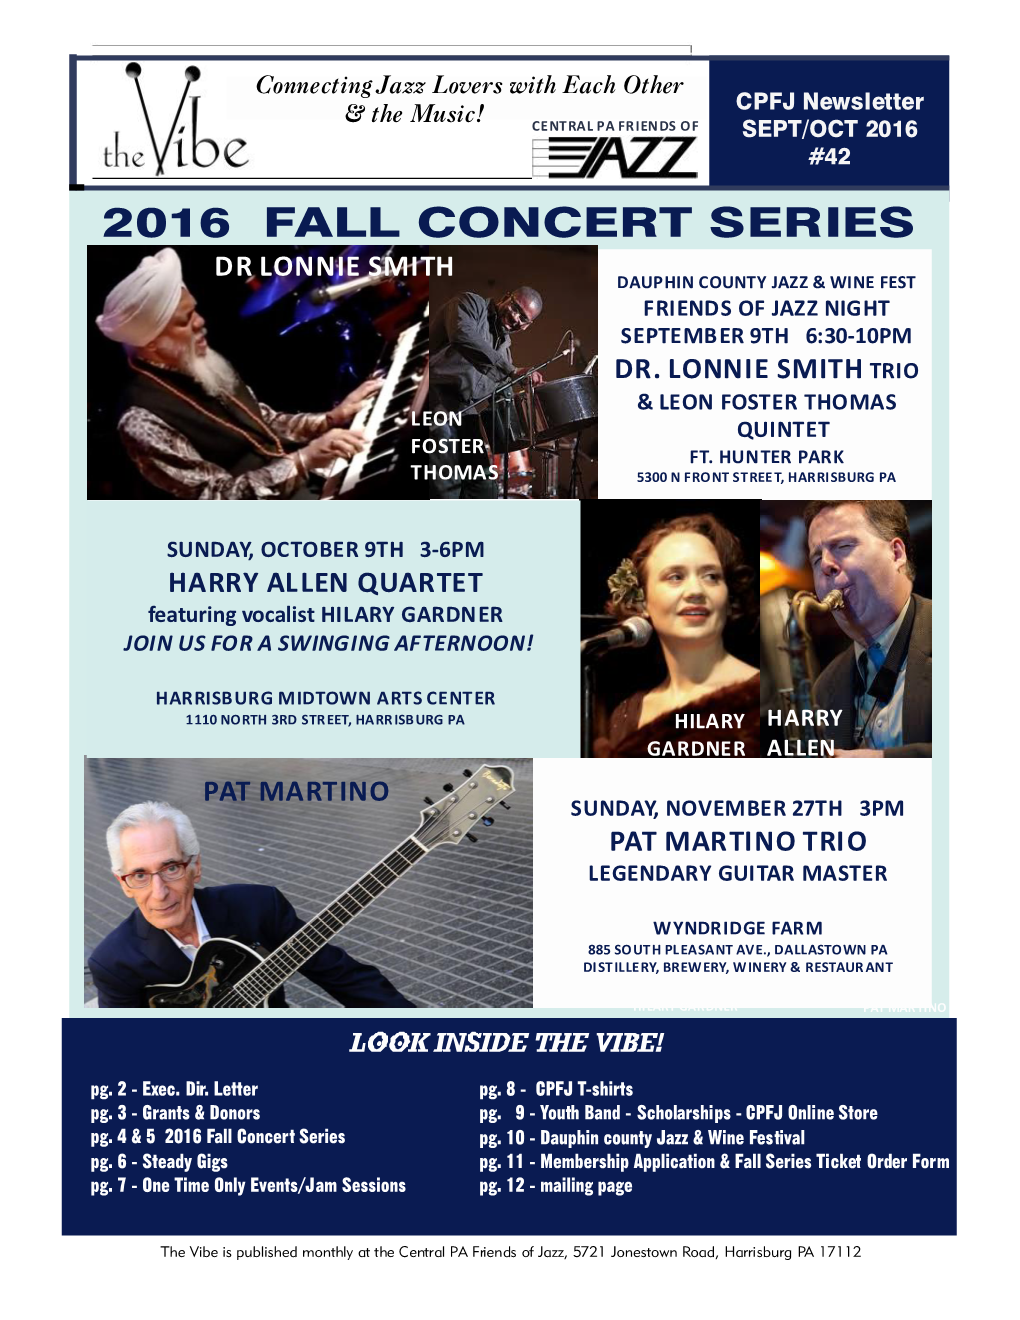 2016 Fall Concert Series Dr Lonnie Smith Dauphin County Jazz & Wine Fest Friends of Jazz Night September 9Th 6:30-10Pm Dr